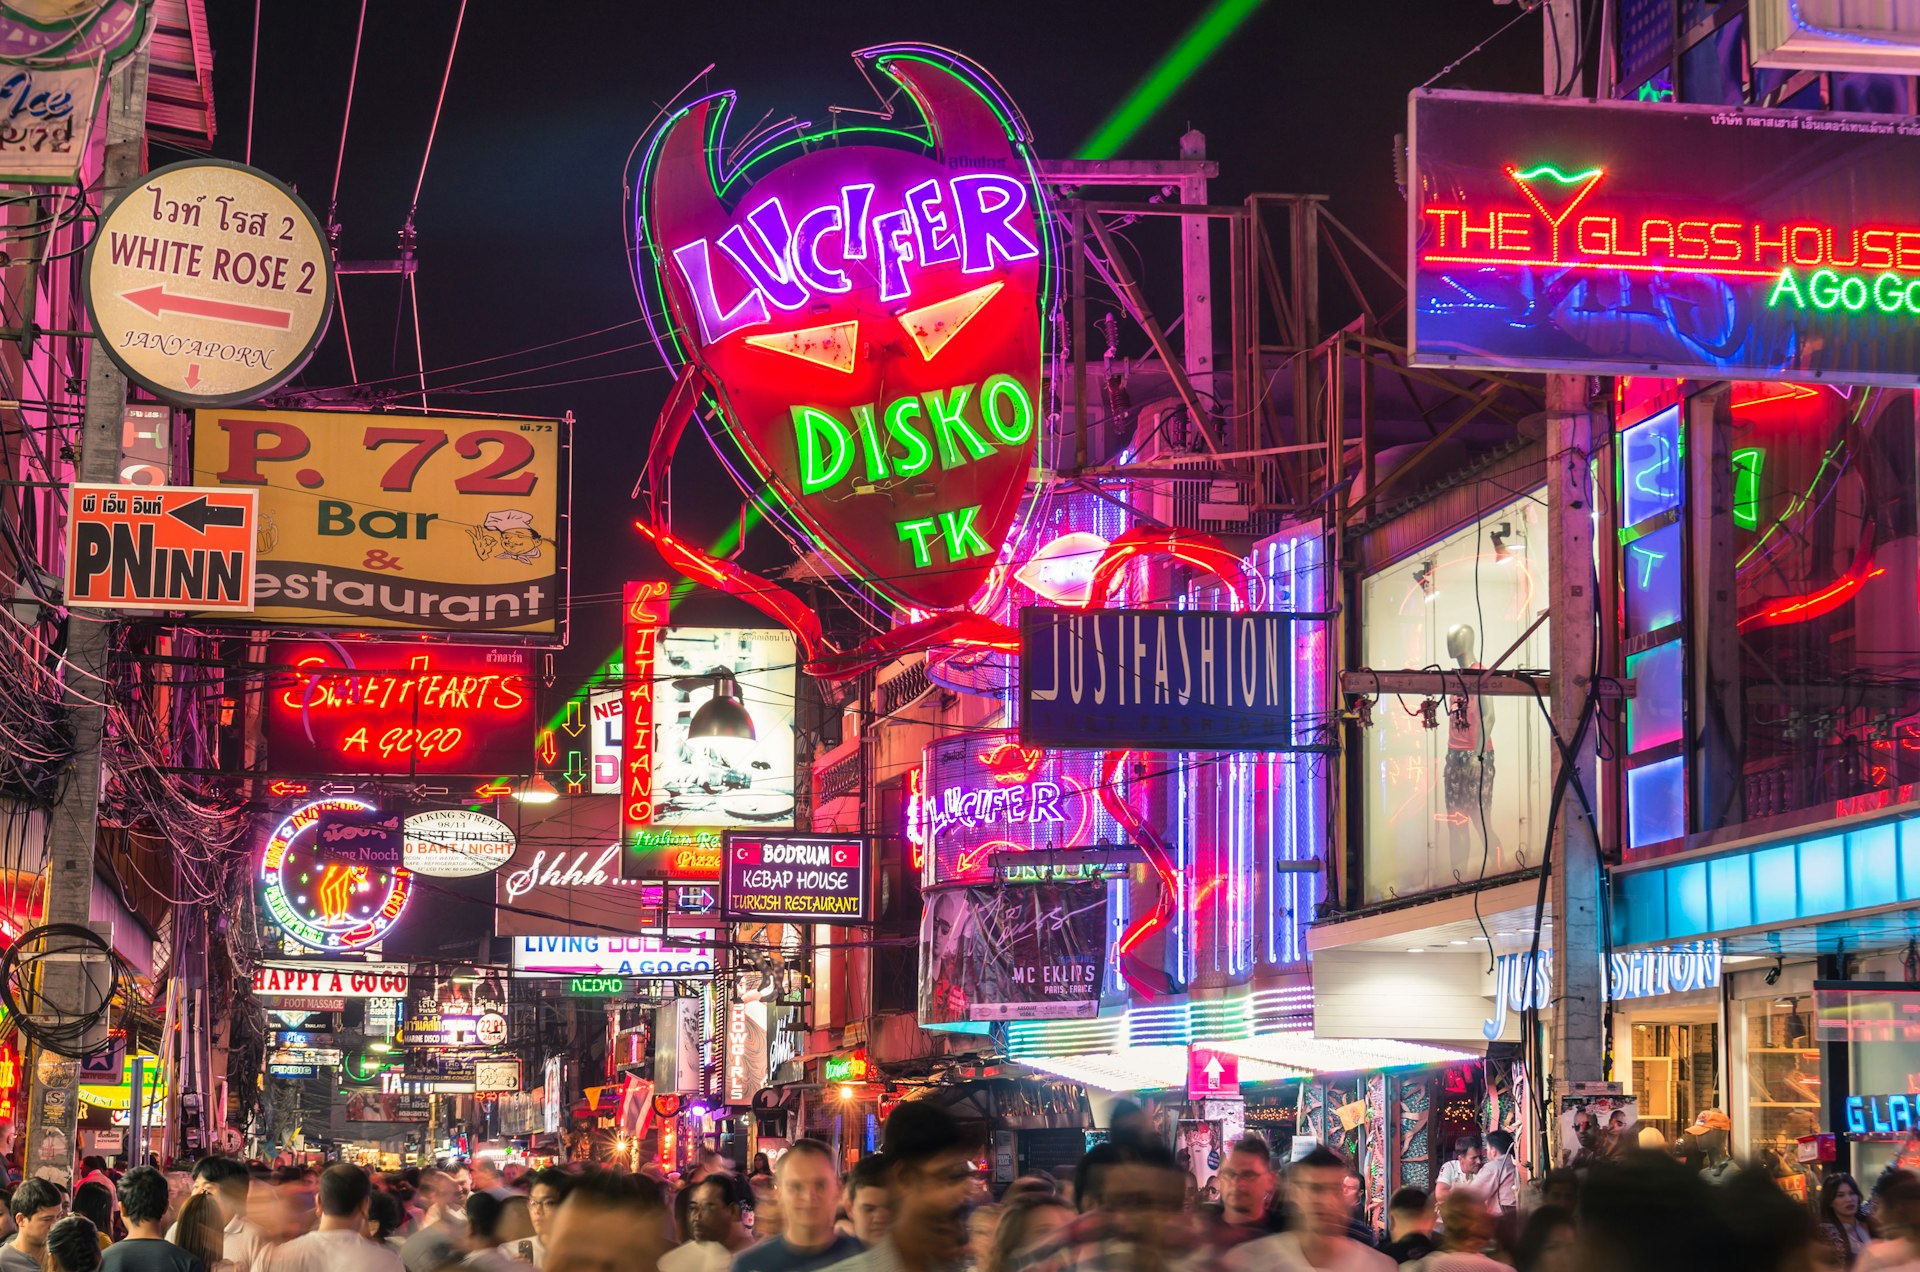 Multicolored neon signs in the heart of the Walking Street in Pattaya. Crowds of people walk through the narrow streets that are lined with bars and restaurants.